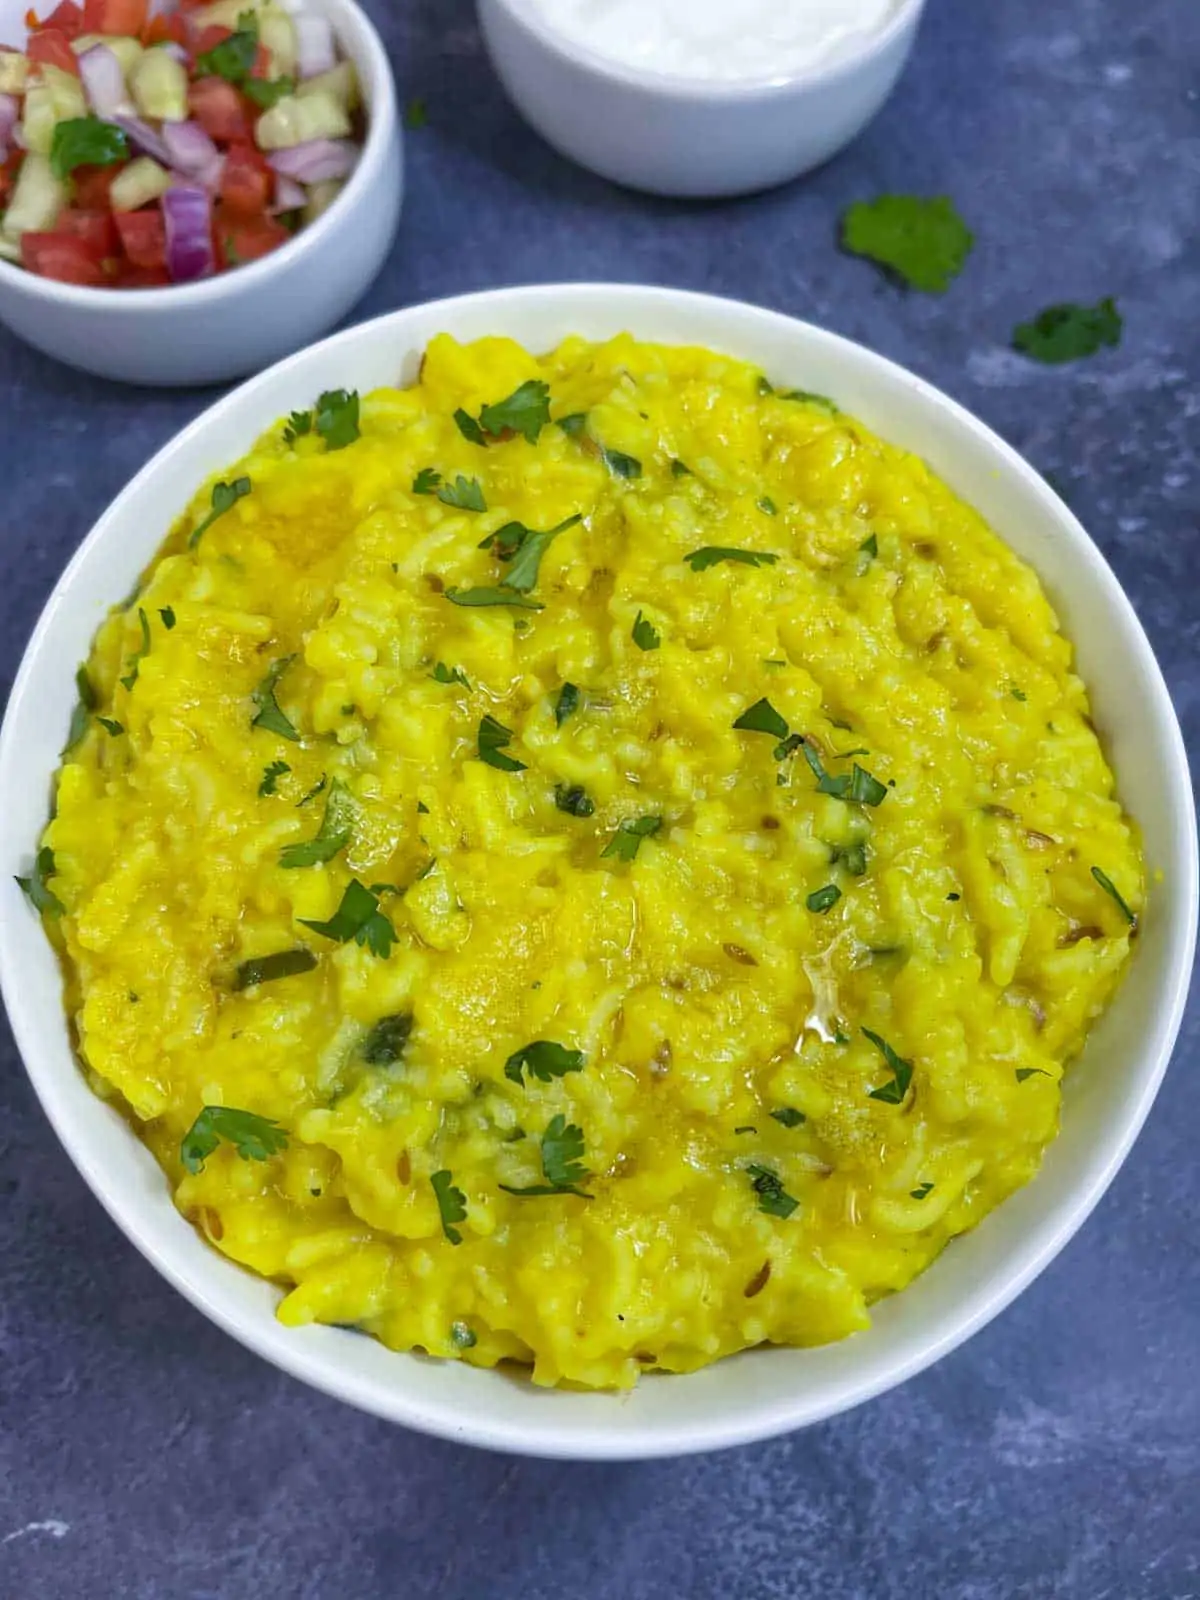 Moong Dal Khichdi served in a bowl garnished with cilantro with salad on the side